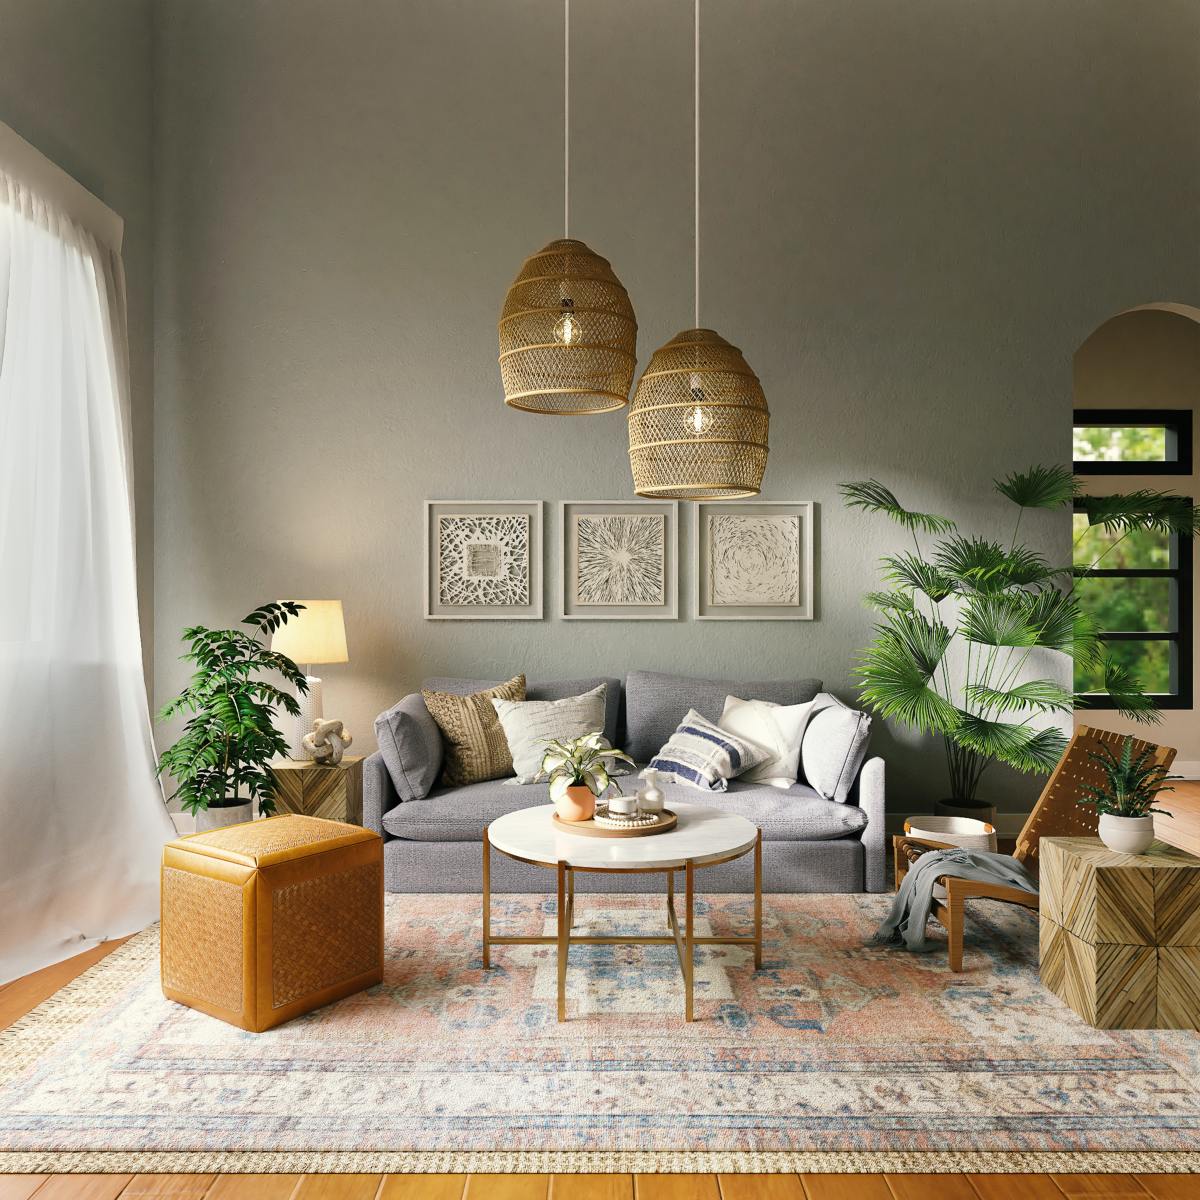 The Taurus living room should be a cozy space with earth tones. The room shouldn't have too many competing patterns. The space should be tidy and have hints of spring.